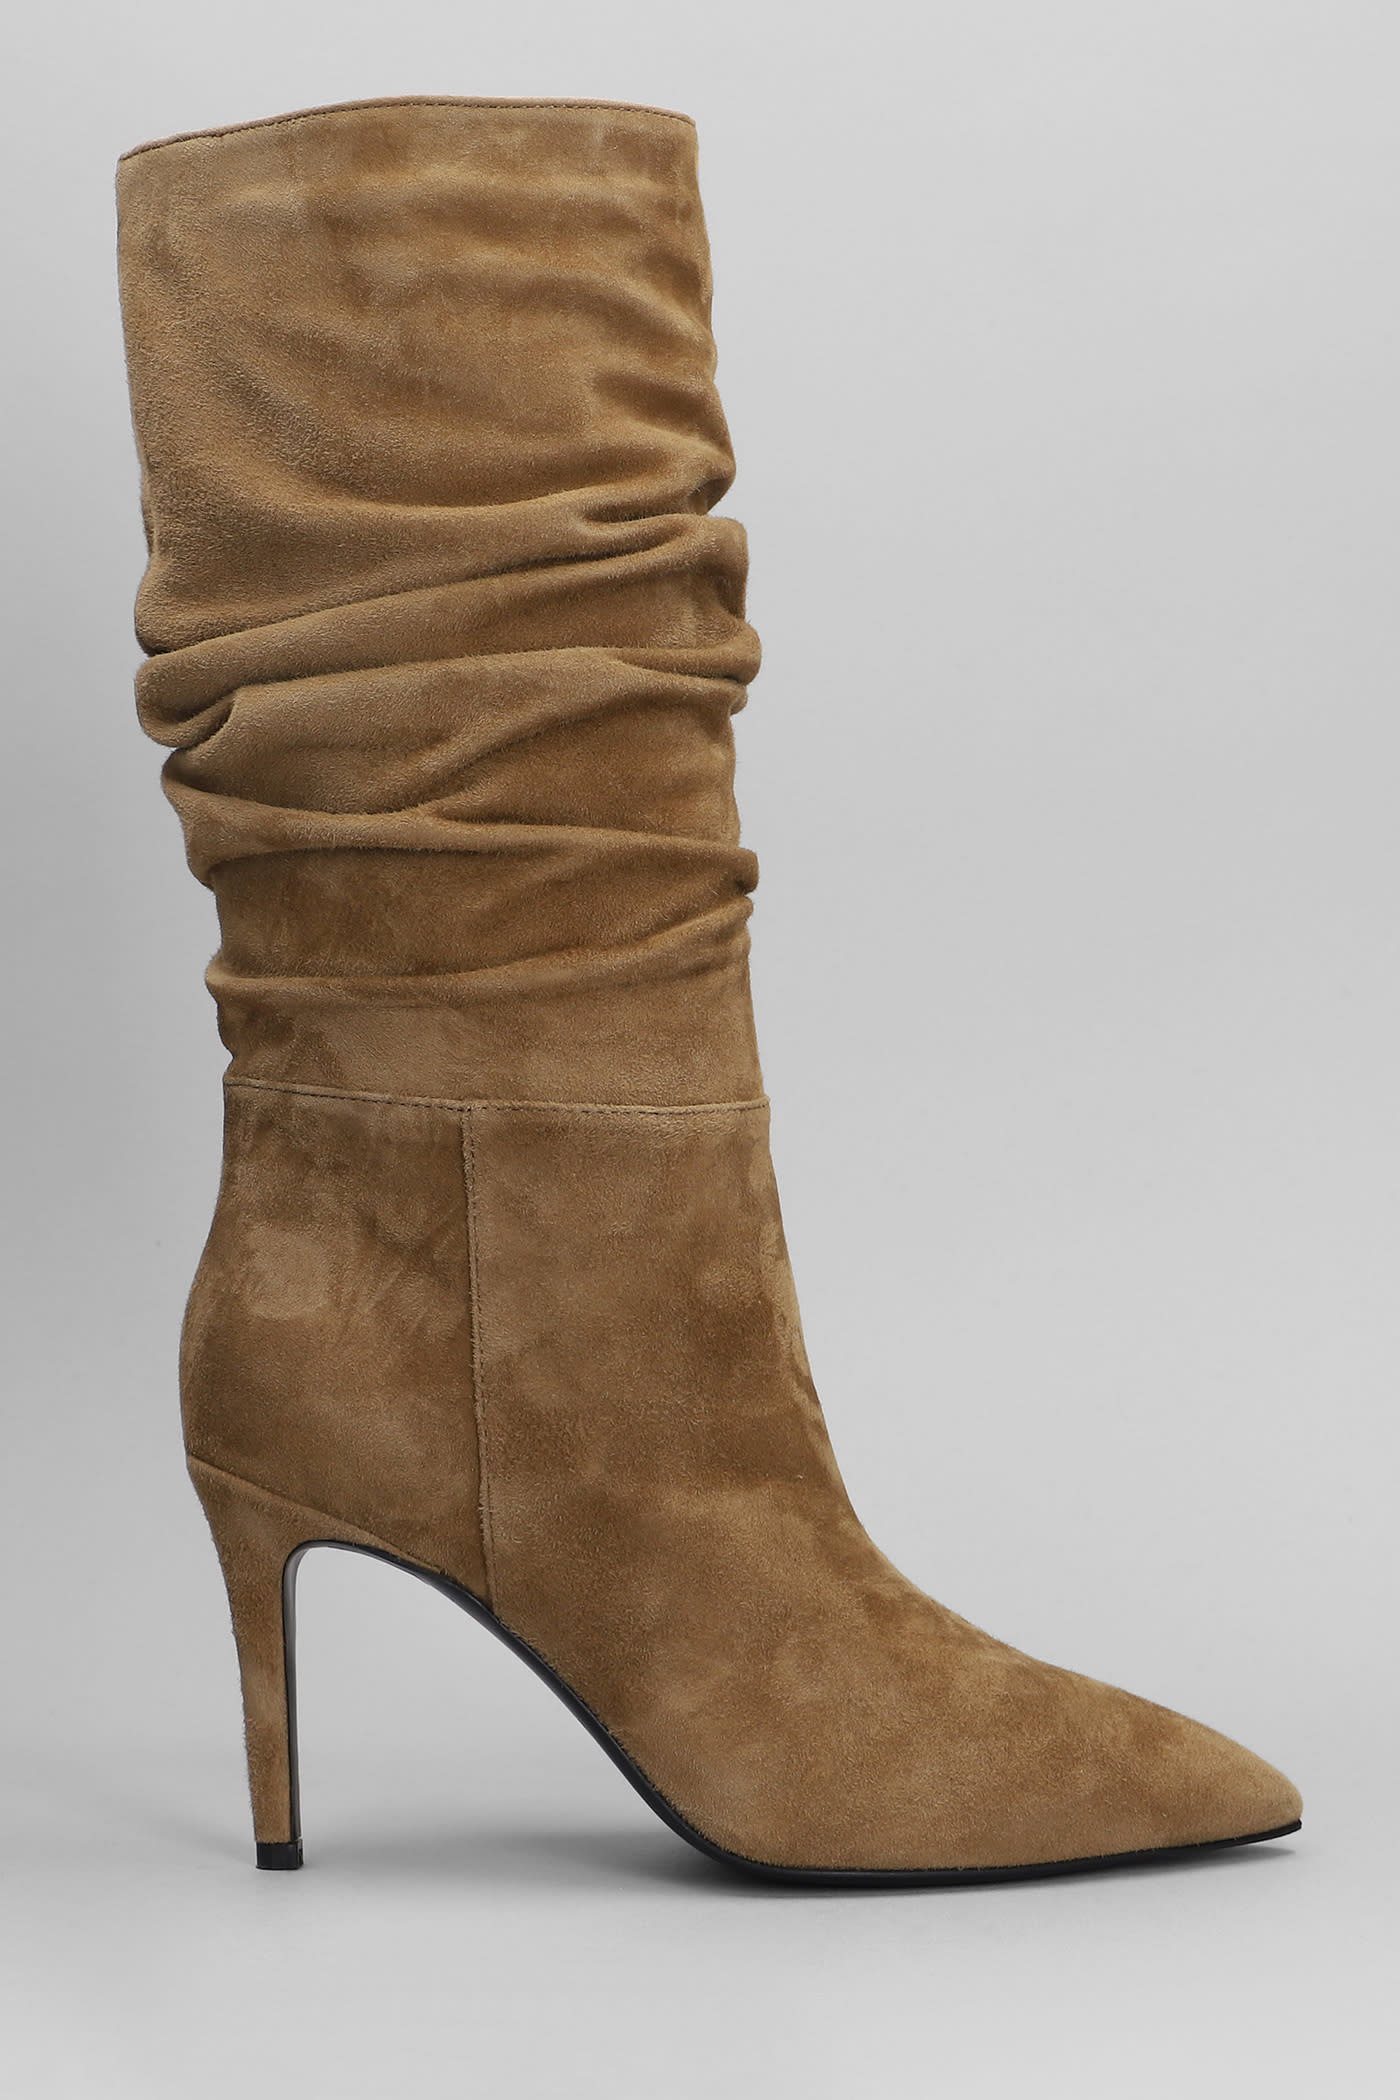 VIA ROMA 15 HIGH HEELS BOOTS IN BROWN SUEDE